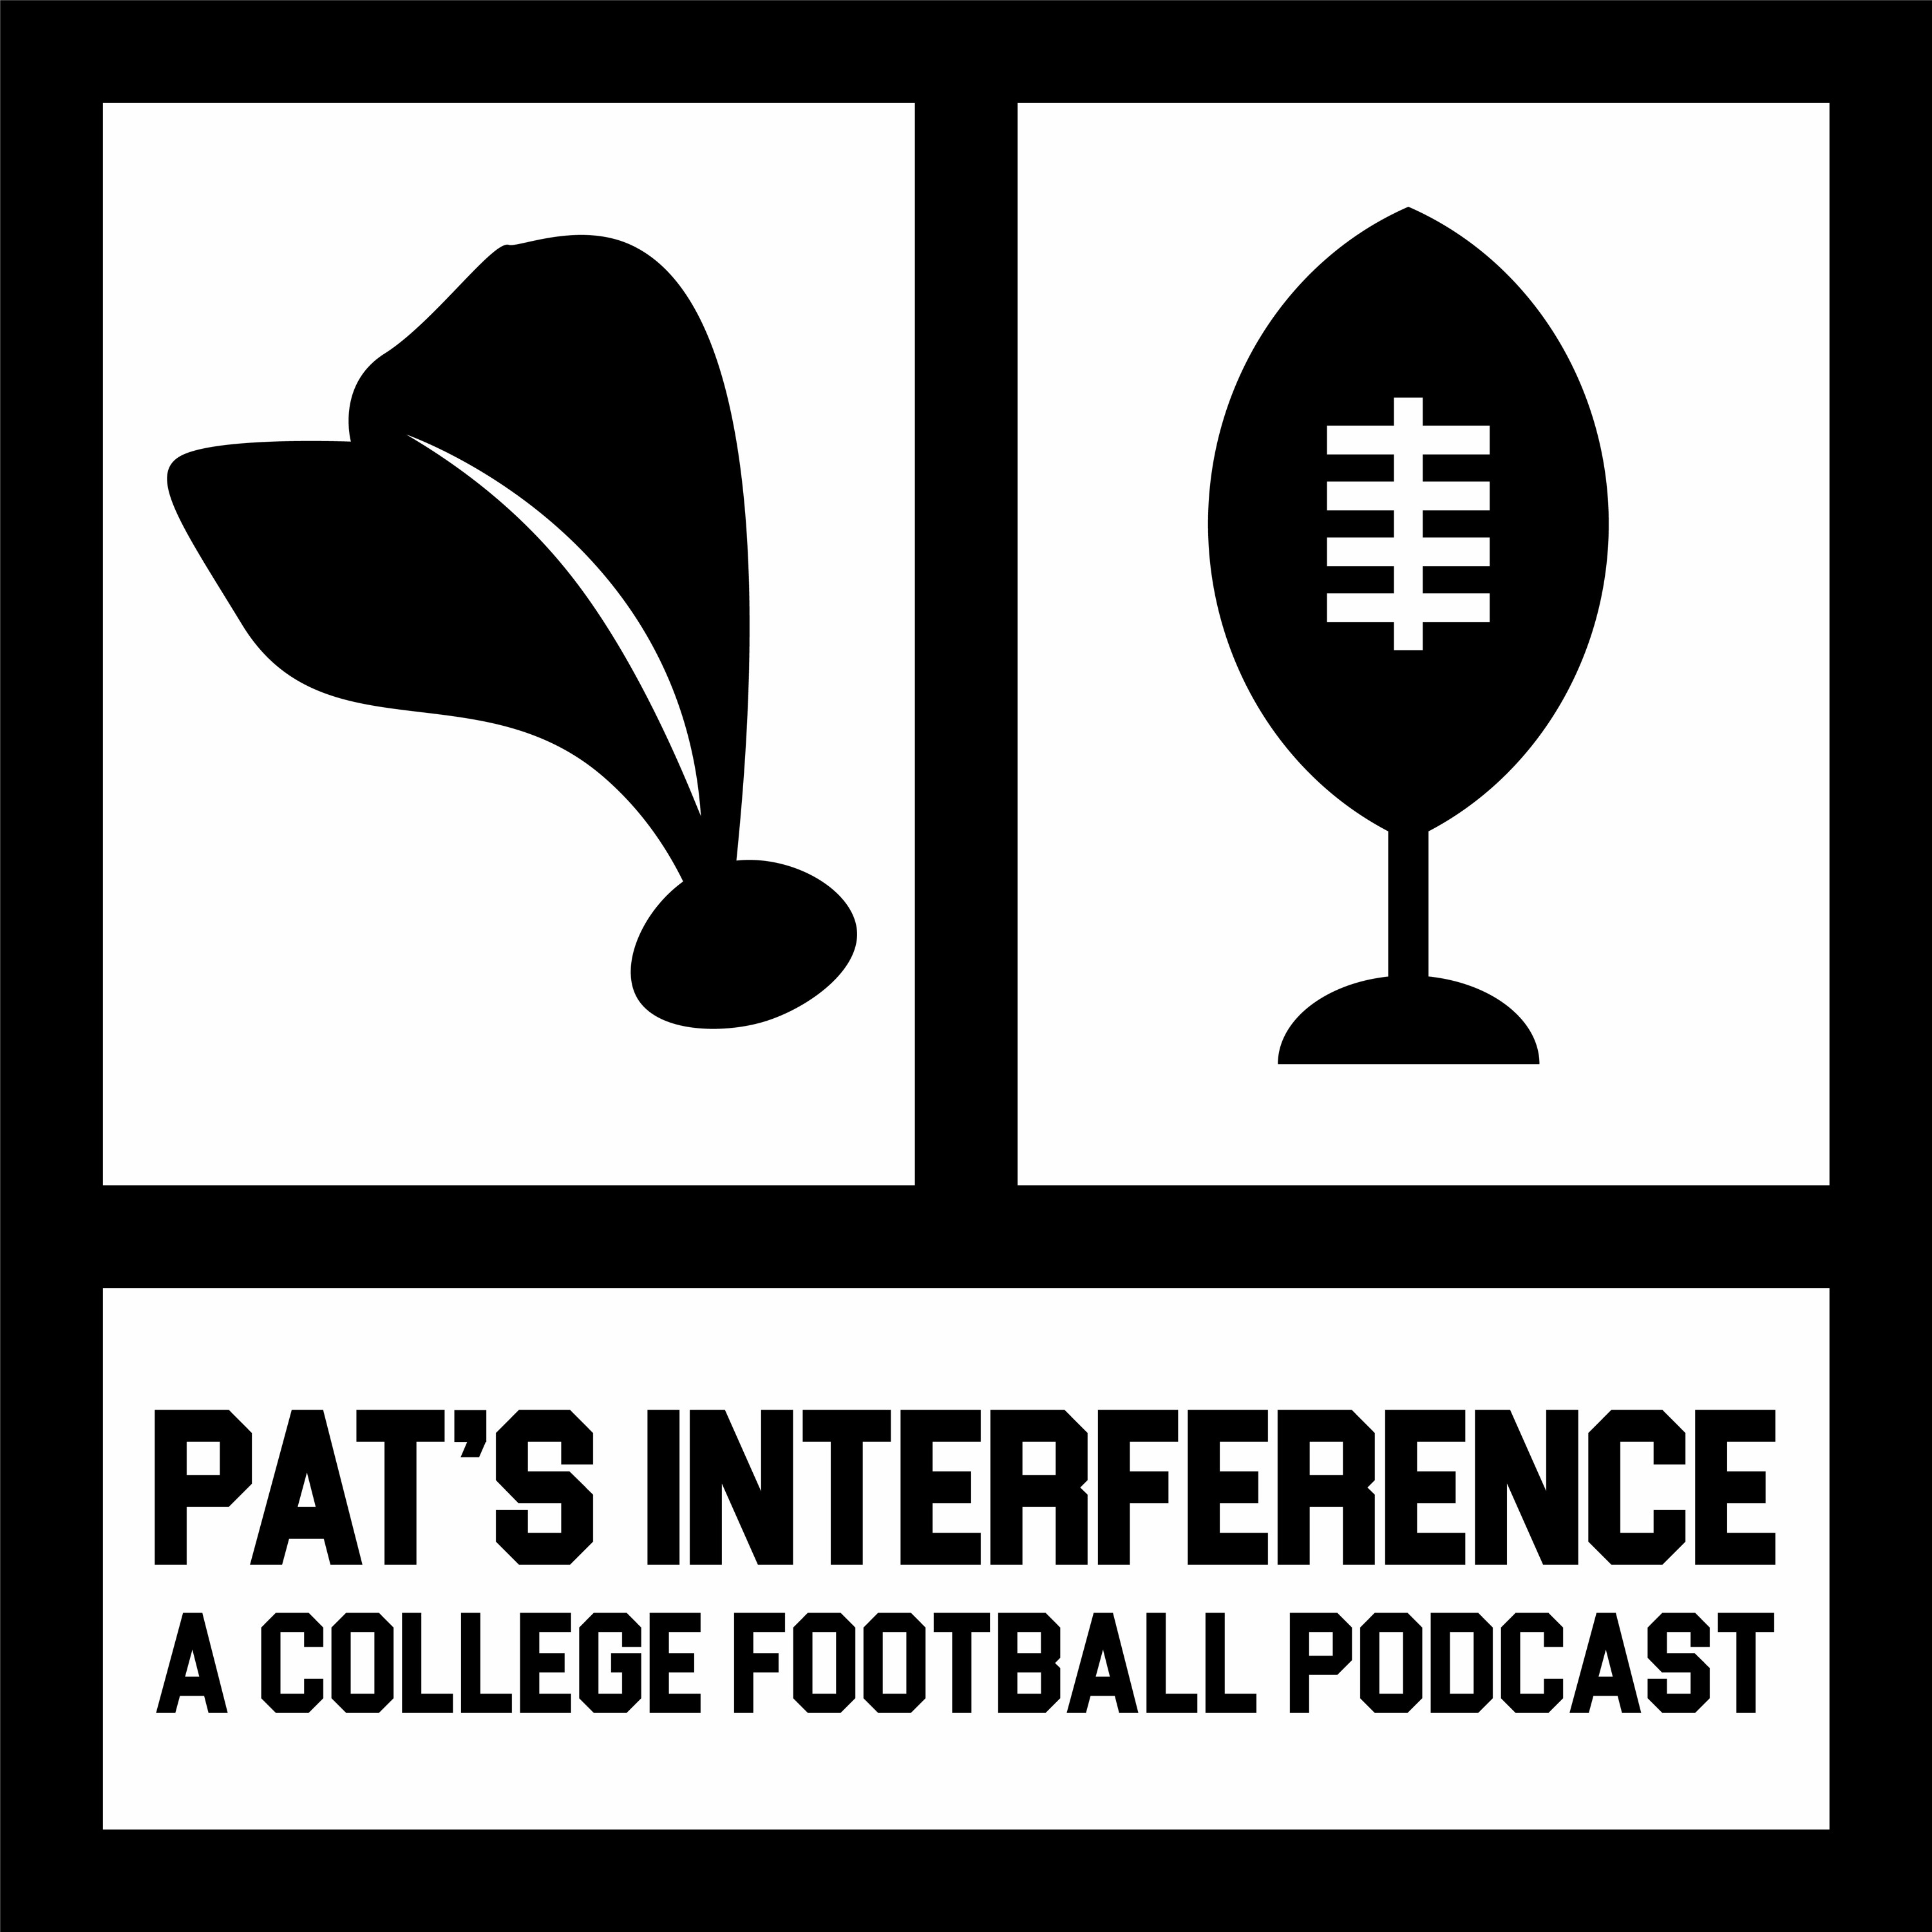 Pat's Interference - The Rhoads to the College Football Playoff